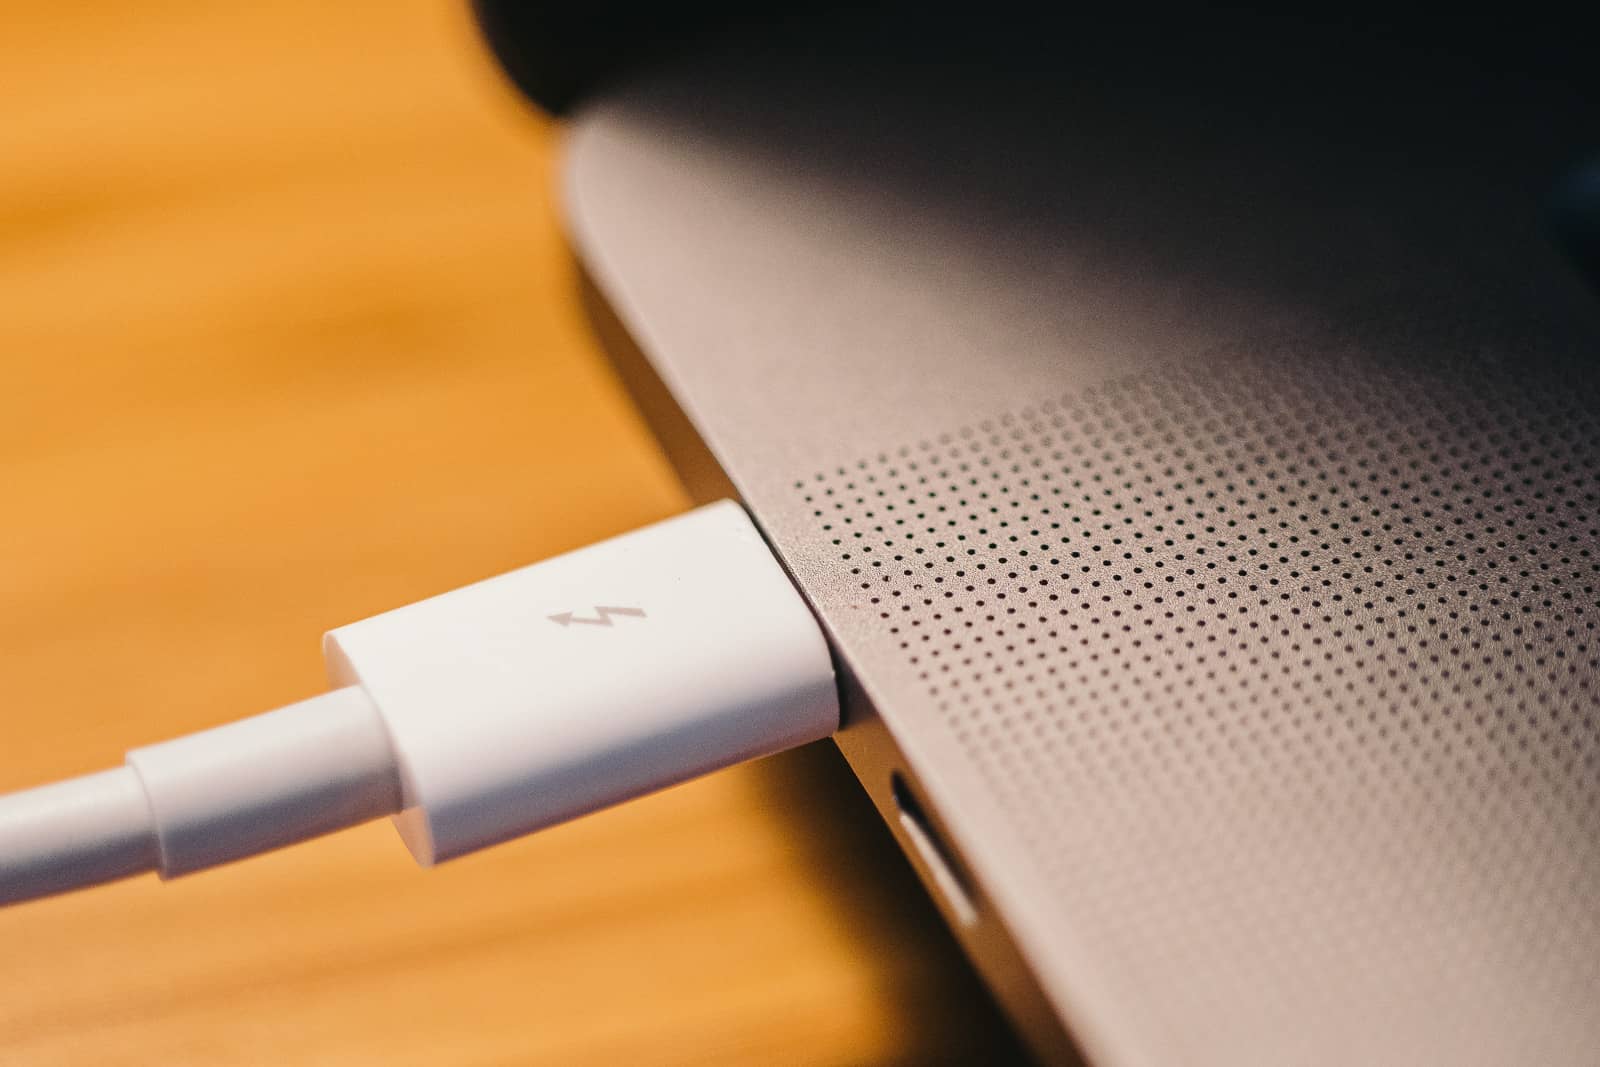 Thunderbolt 3 cable plugged into a MacBook Pro (2019)